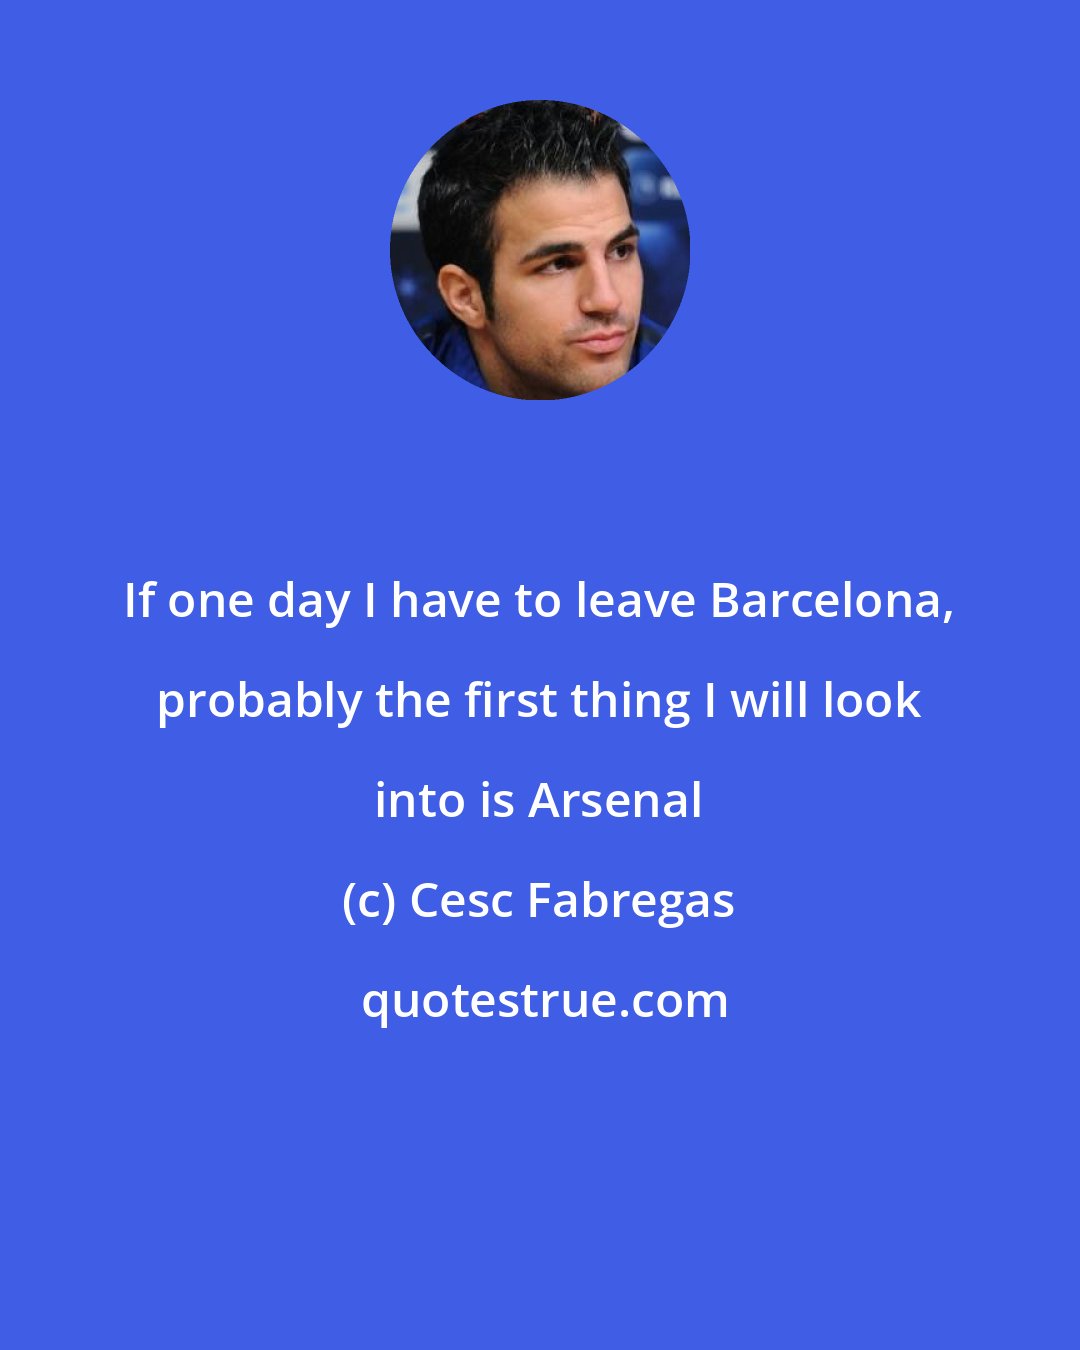 Cesc Fabregas: If one day I have to leave Barcelona, probably the first thing I will look into is Arsenal